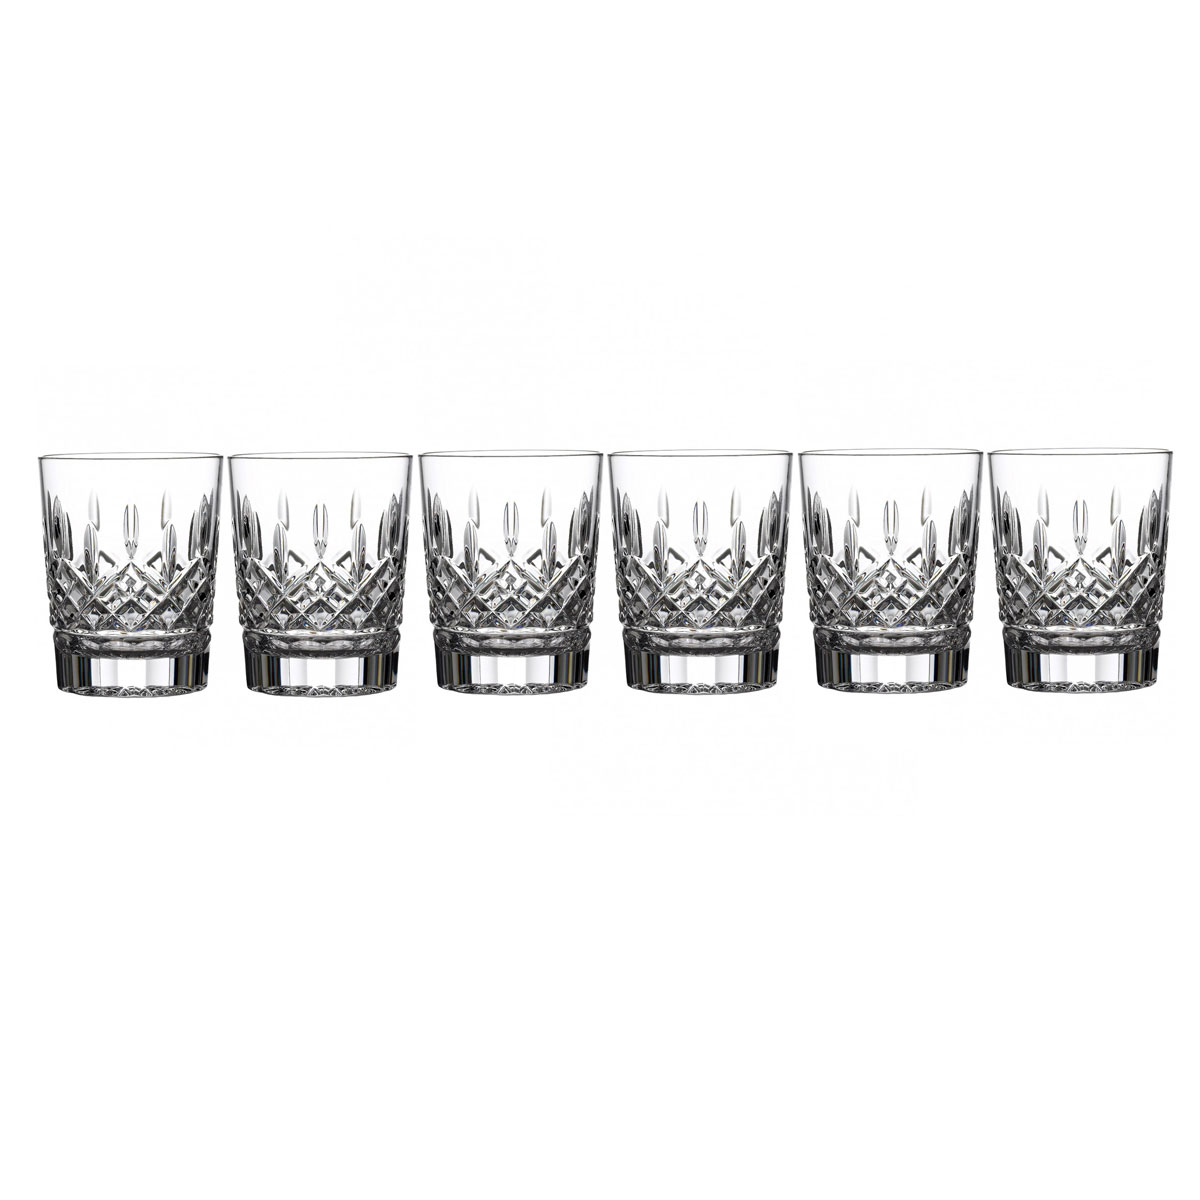 Waterford Crystal, Lismore DOF Tumblers, Boxed Set of 6